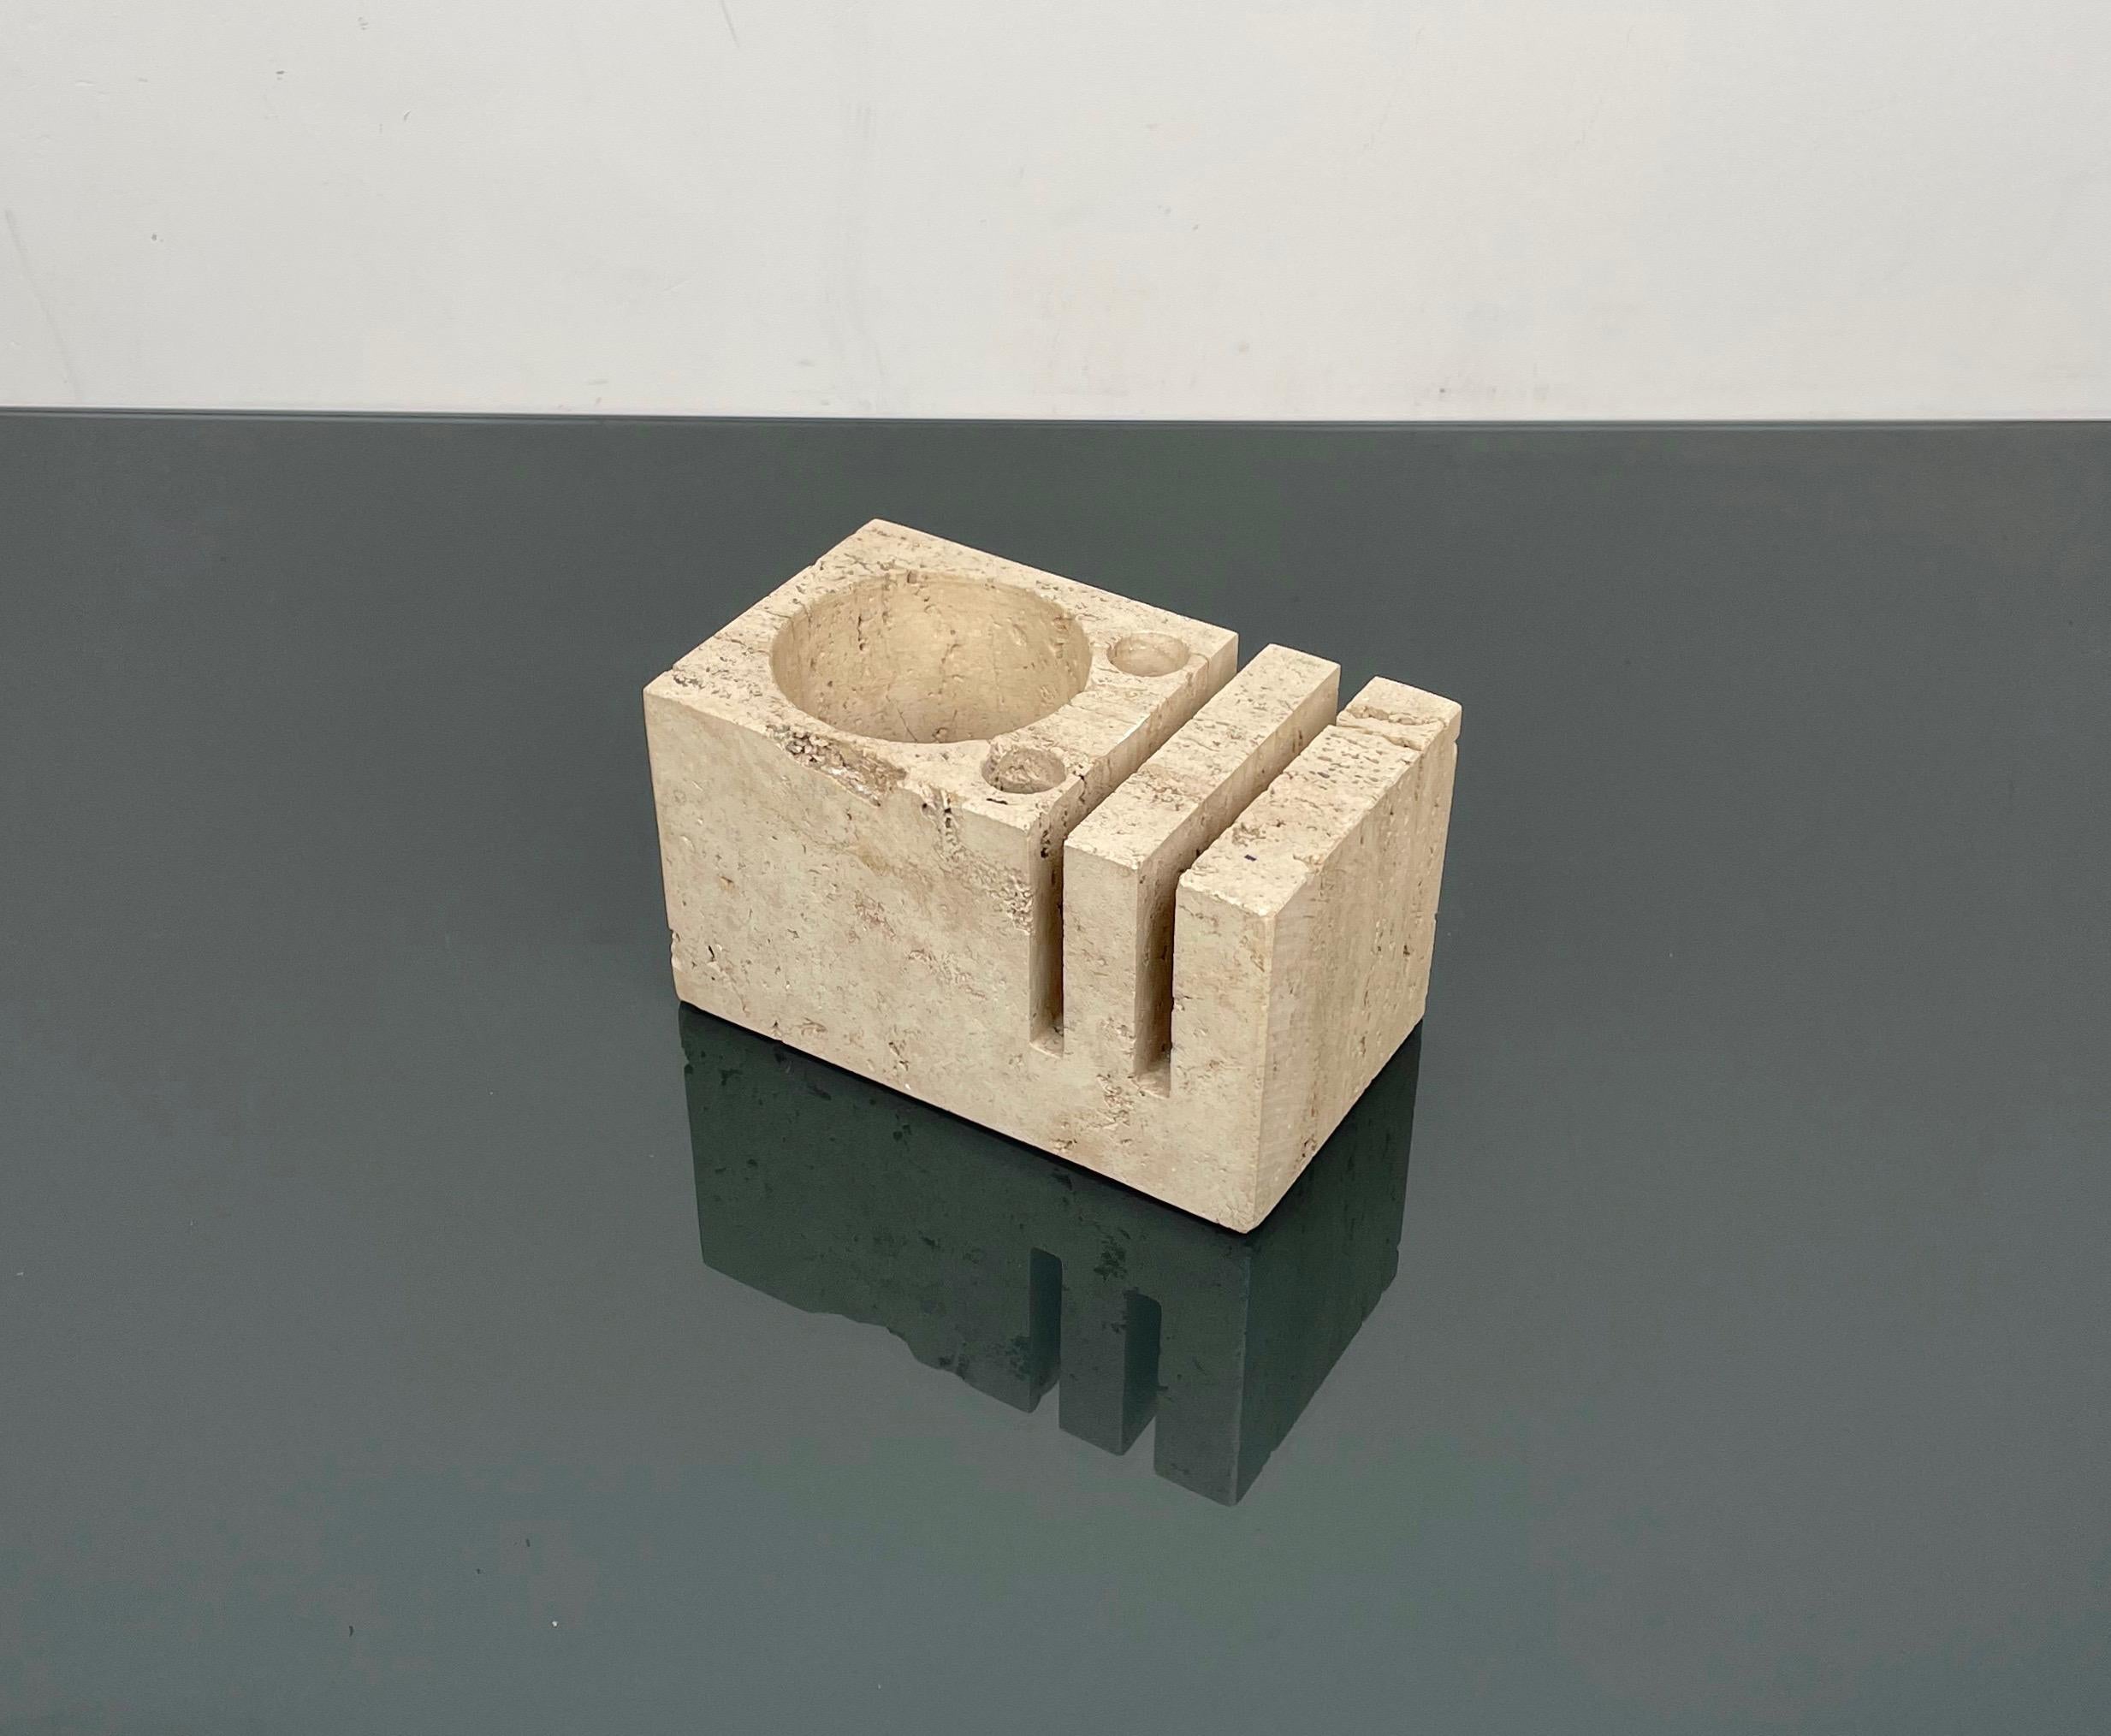 Amazing desk accessory (pen holder - letter holder) in travertine attributed to Fratelli Mannelli, made in Italy in the 1970s

Weight: 3 Kg.